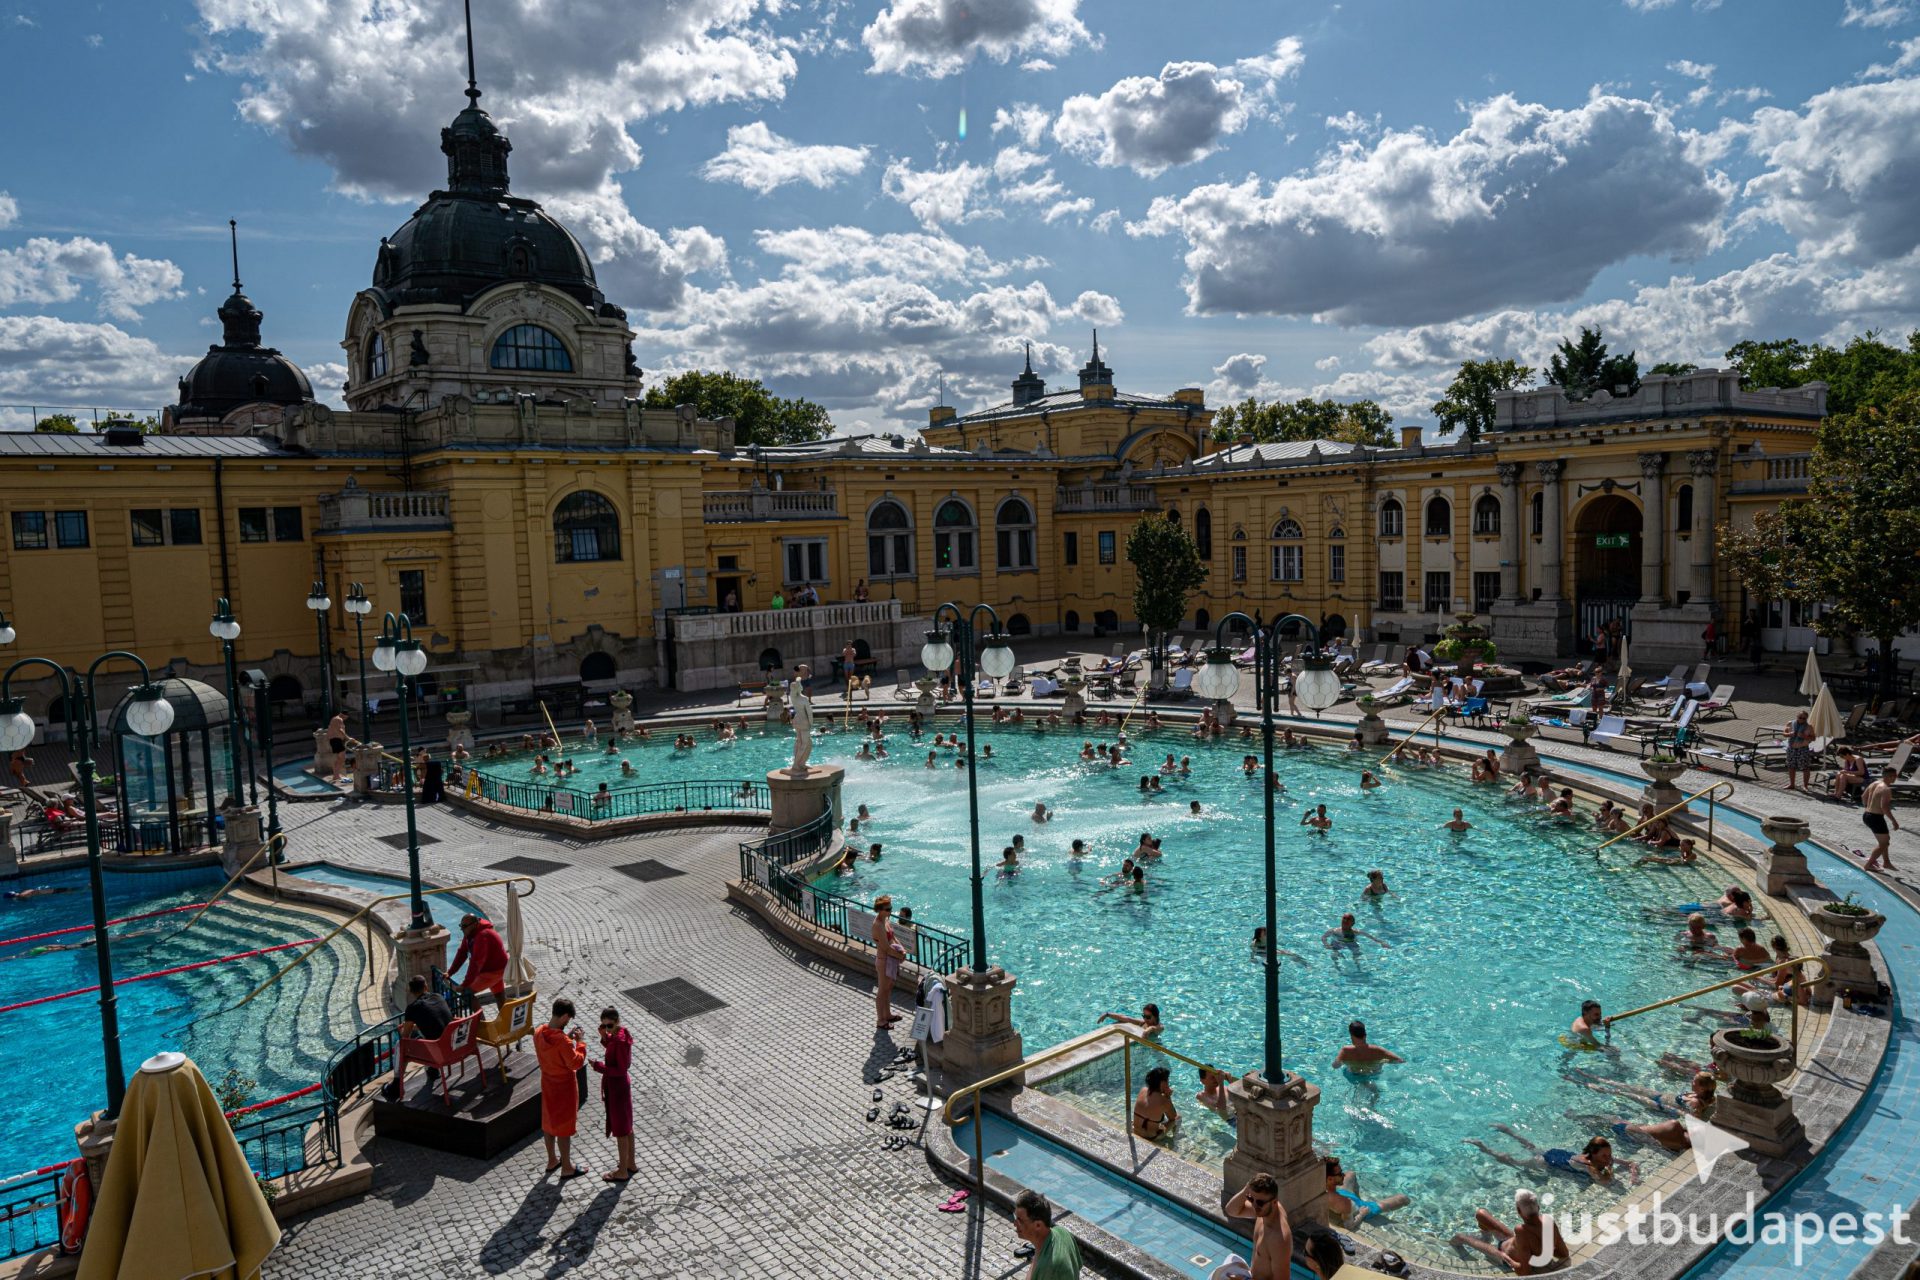 The outside pools of Széchenyi Thermal Bath in the City Park of Budapest